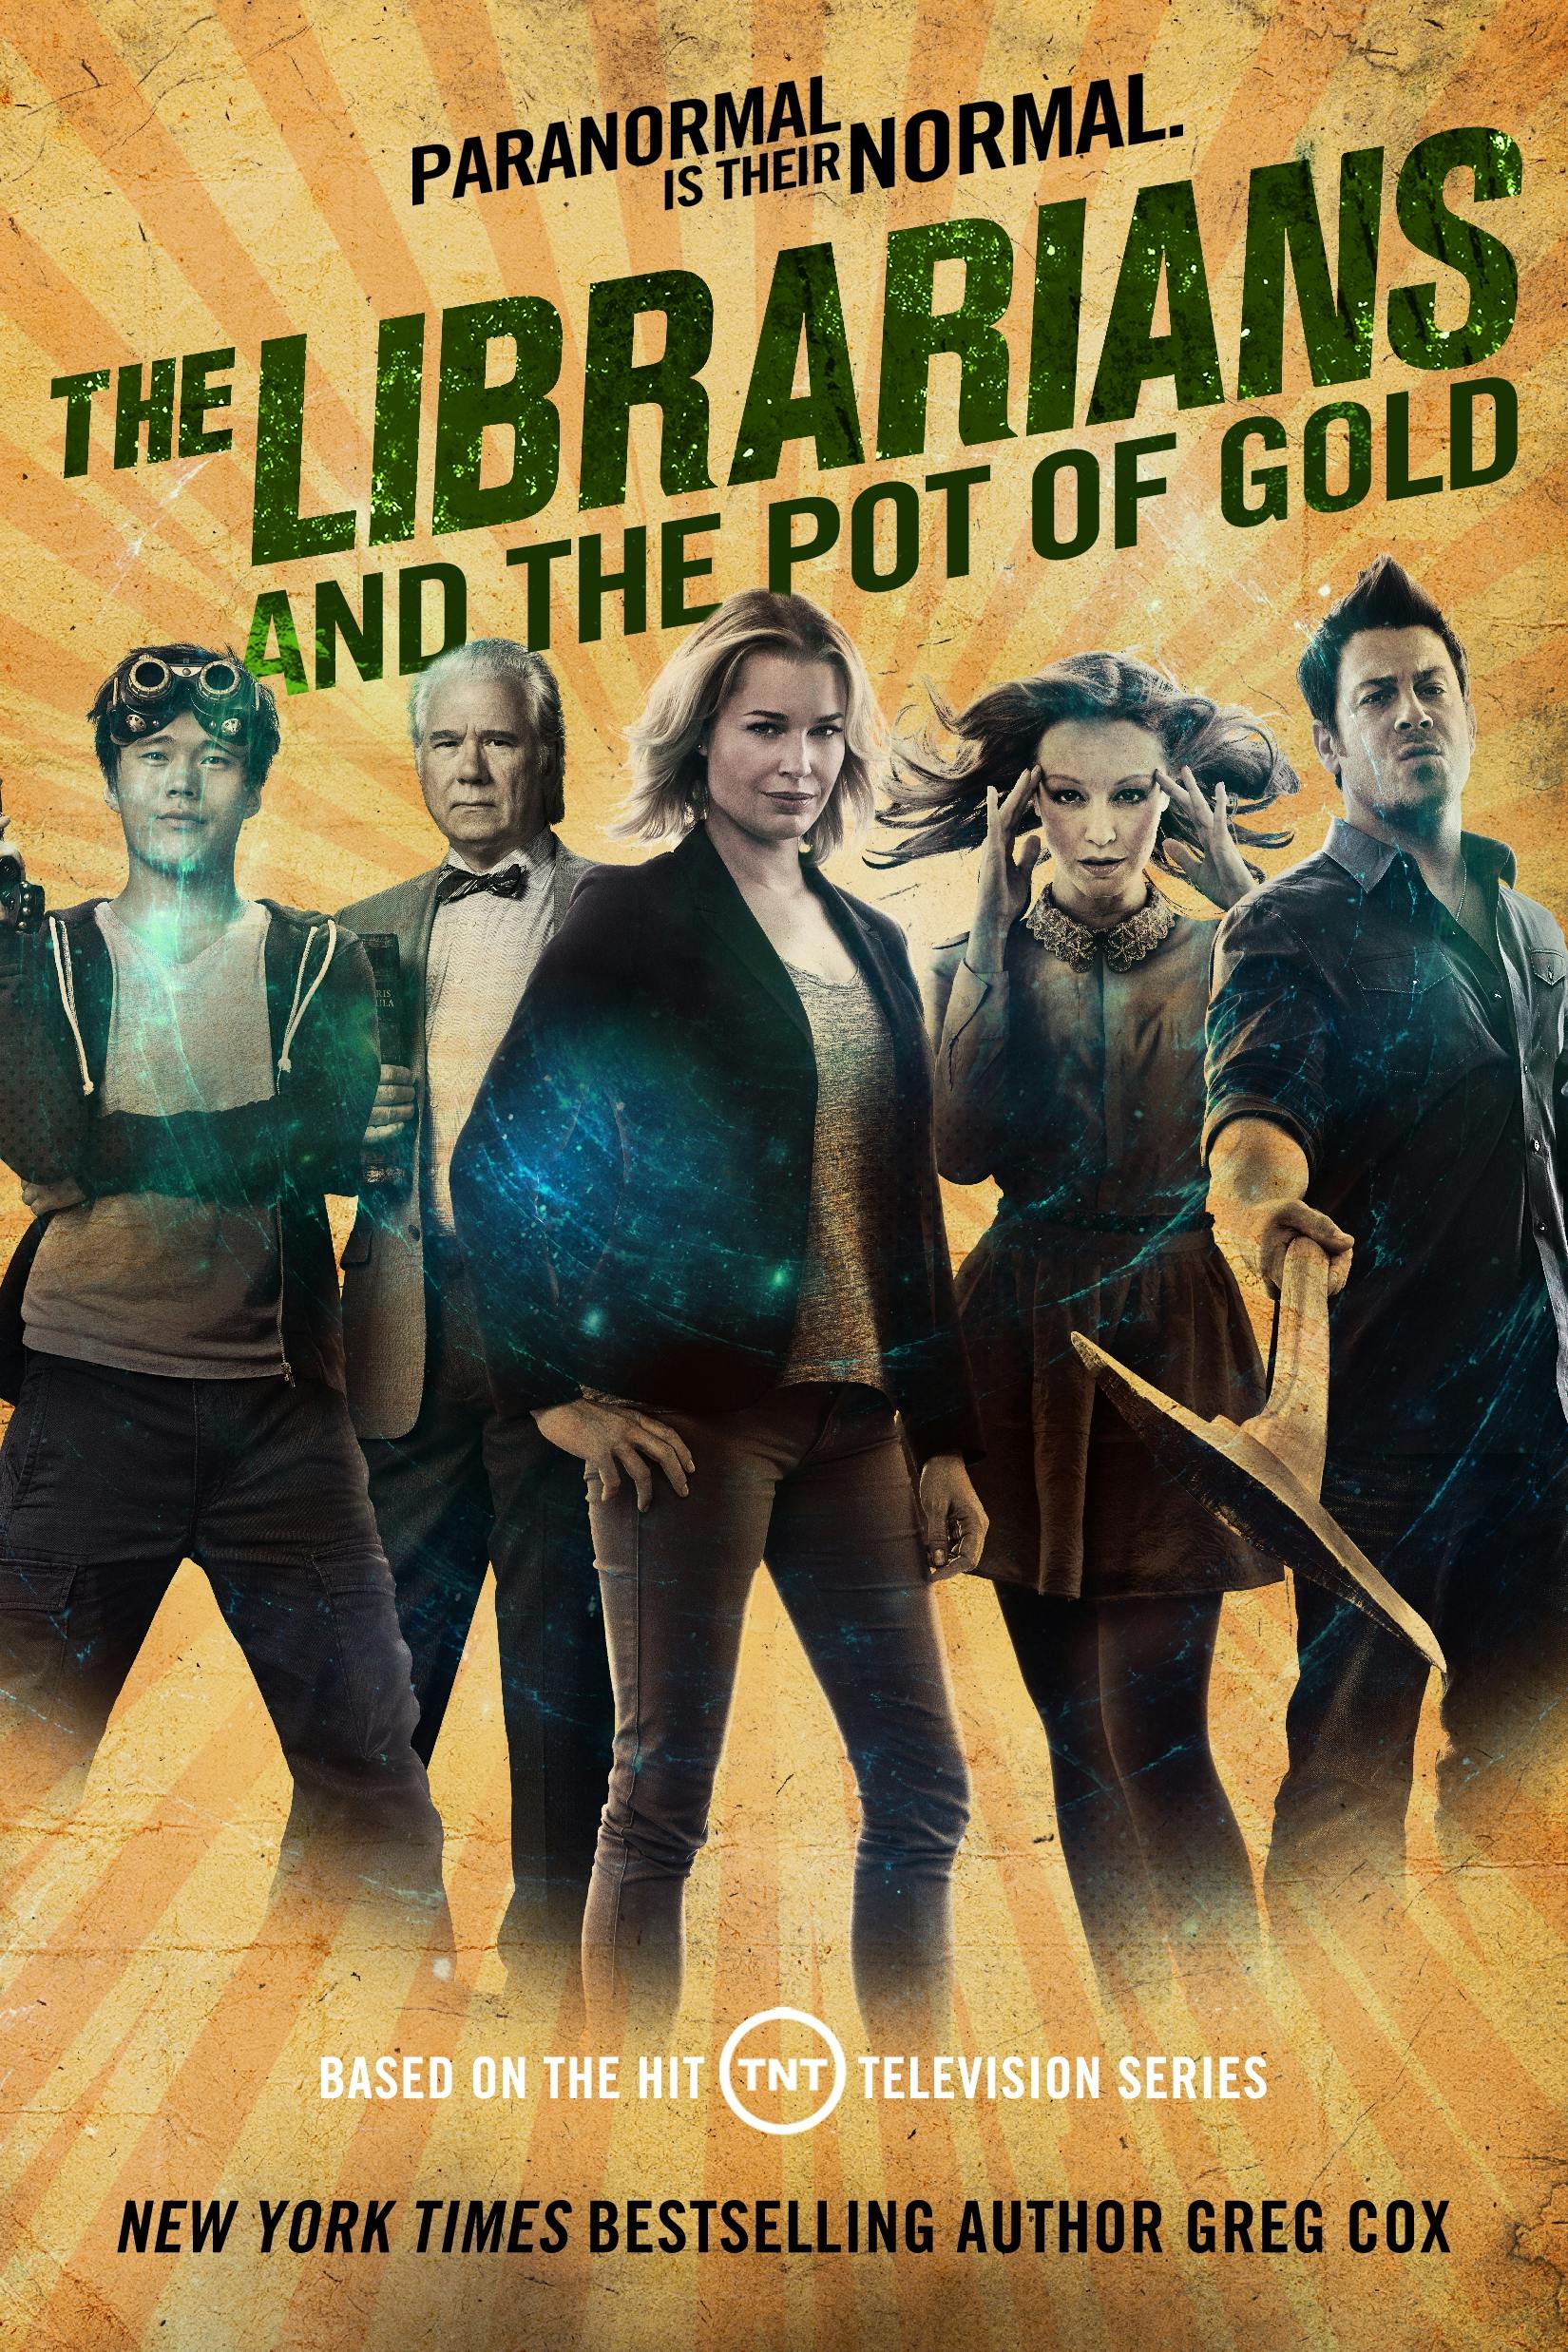 Image of The Librarians and the Pot of Gold